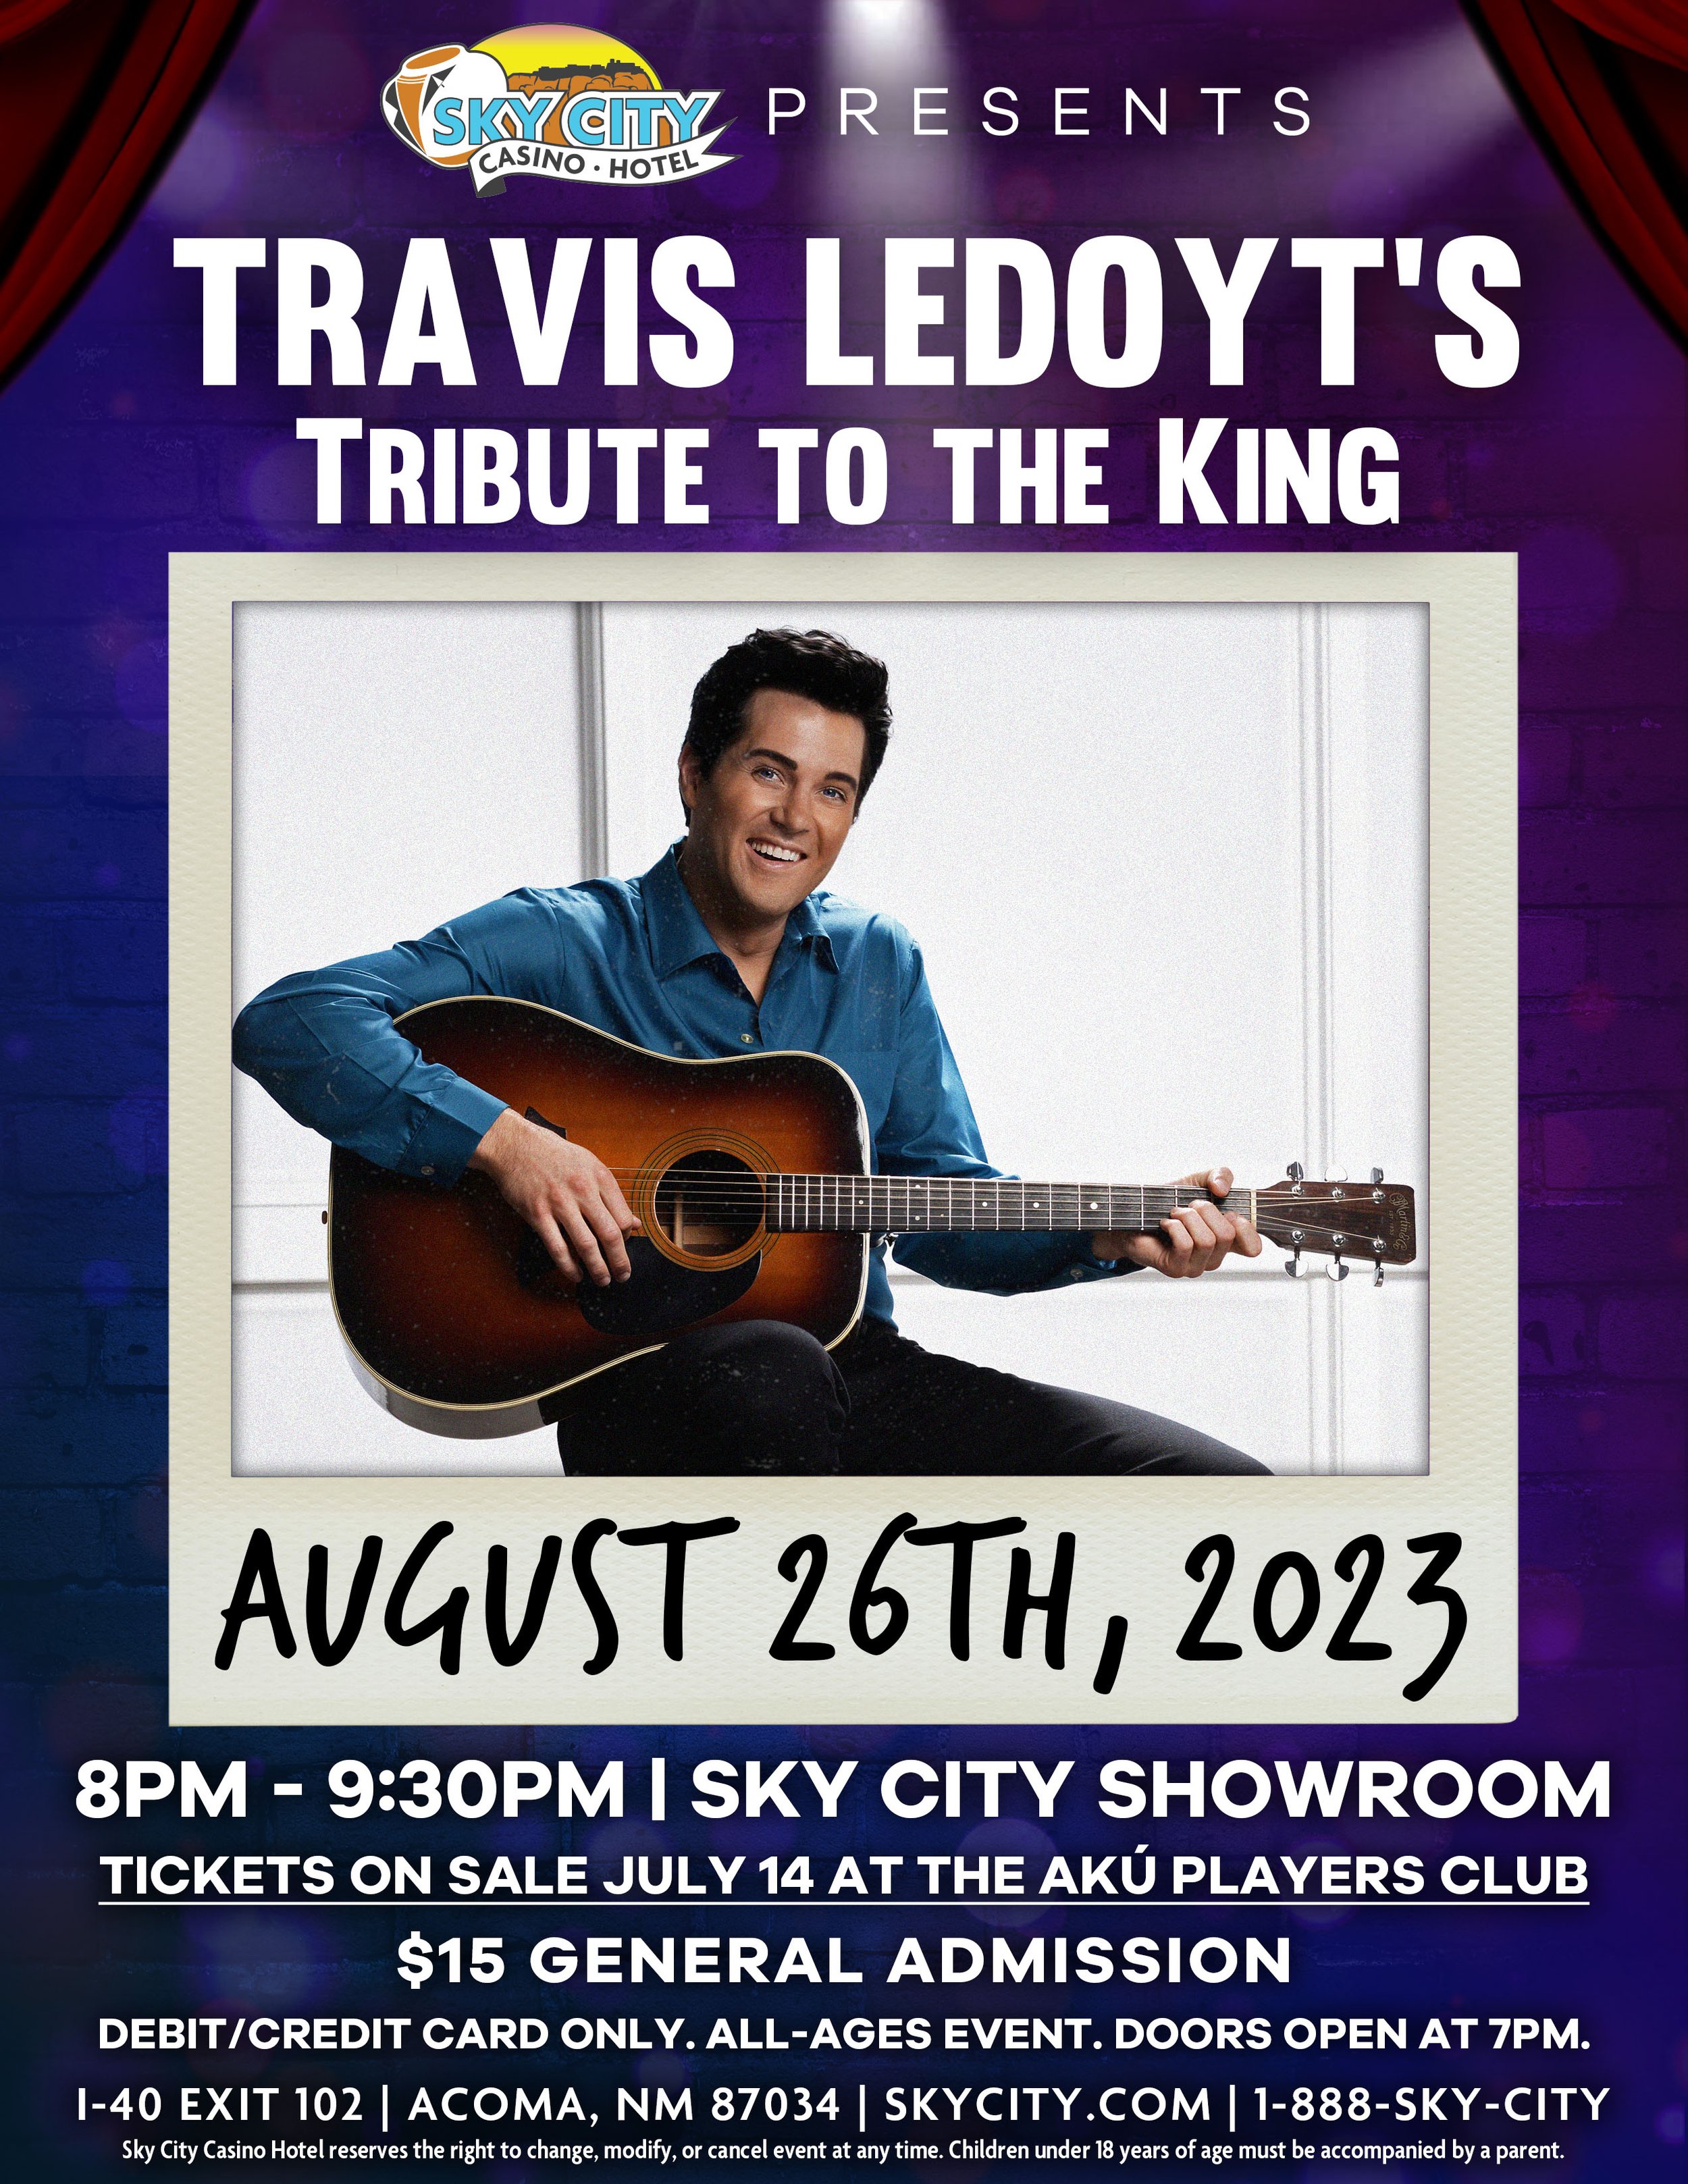 SCCH Presents Travis Ledoyt Tribute to the King.jpg